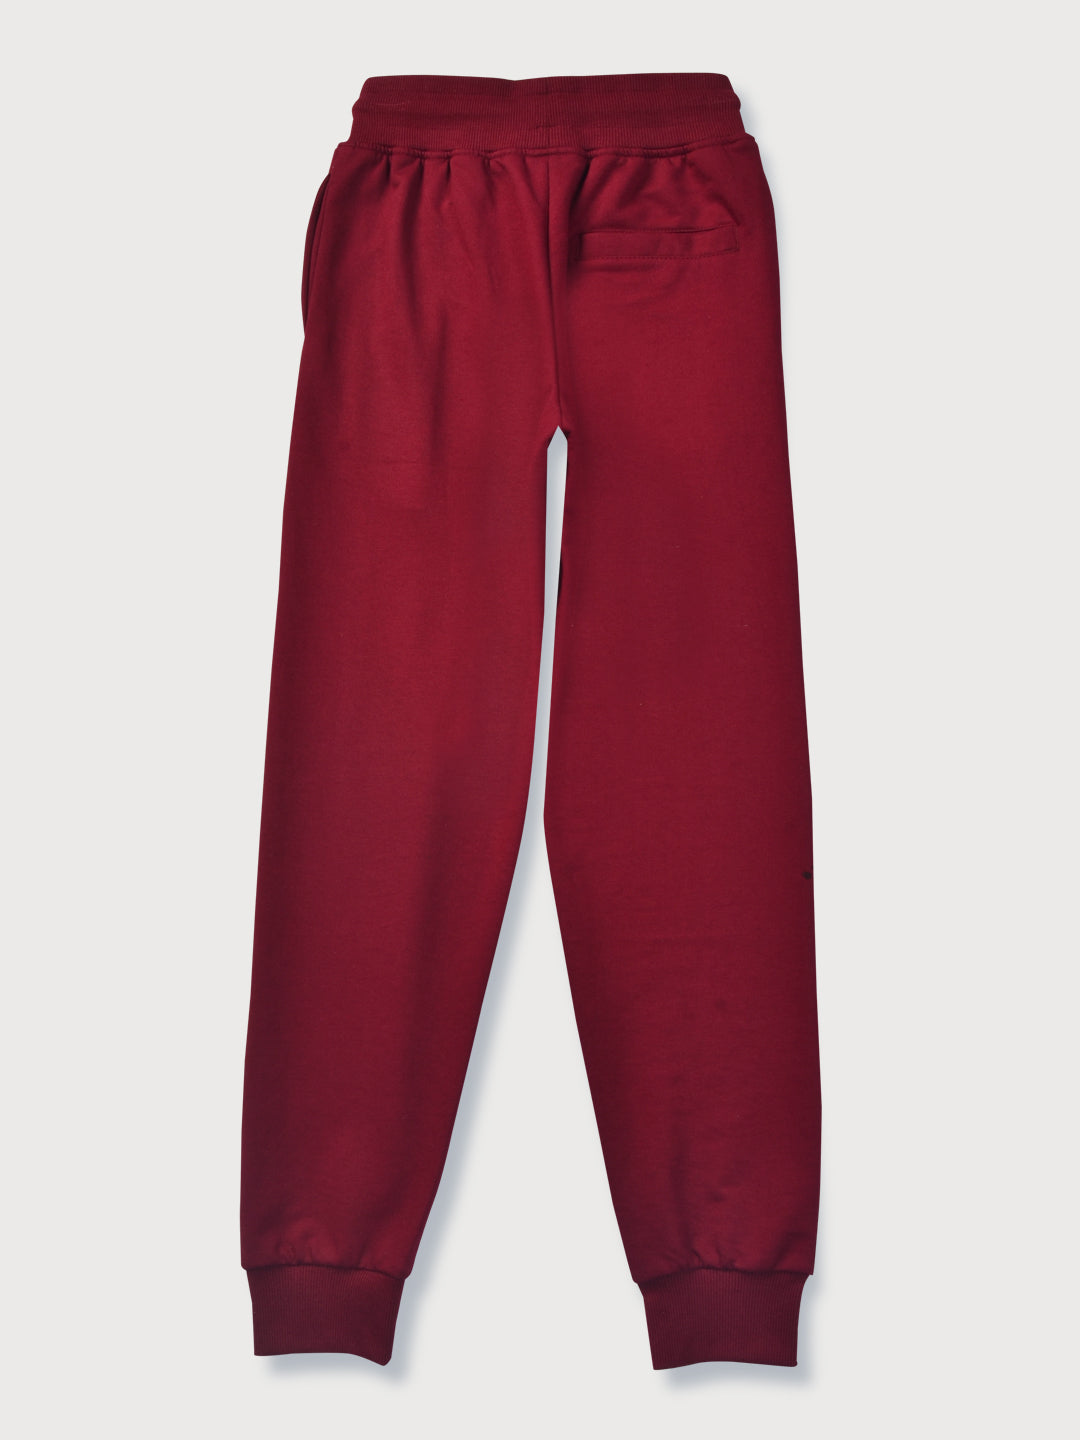 Boys Red Printed Cotton Track Pant